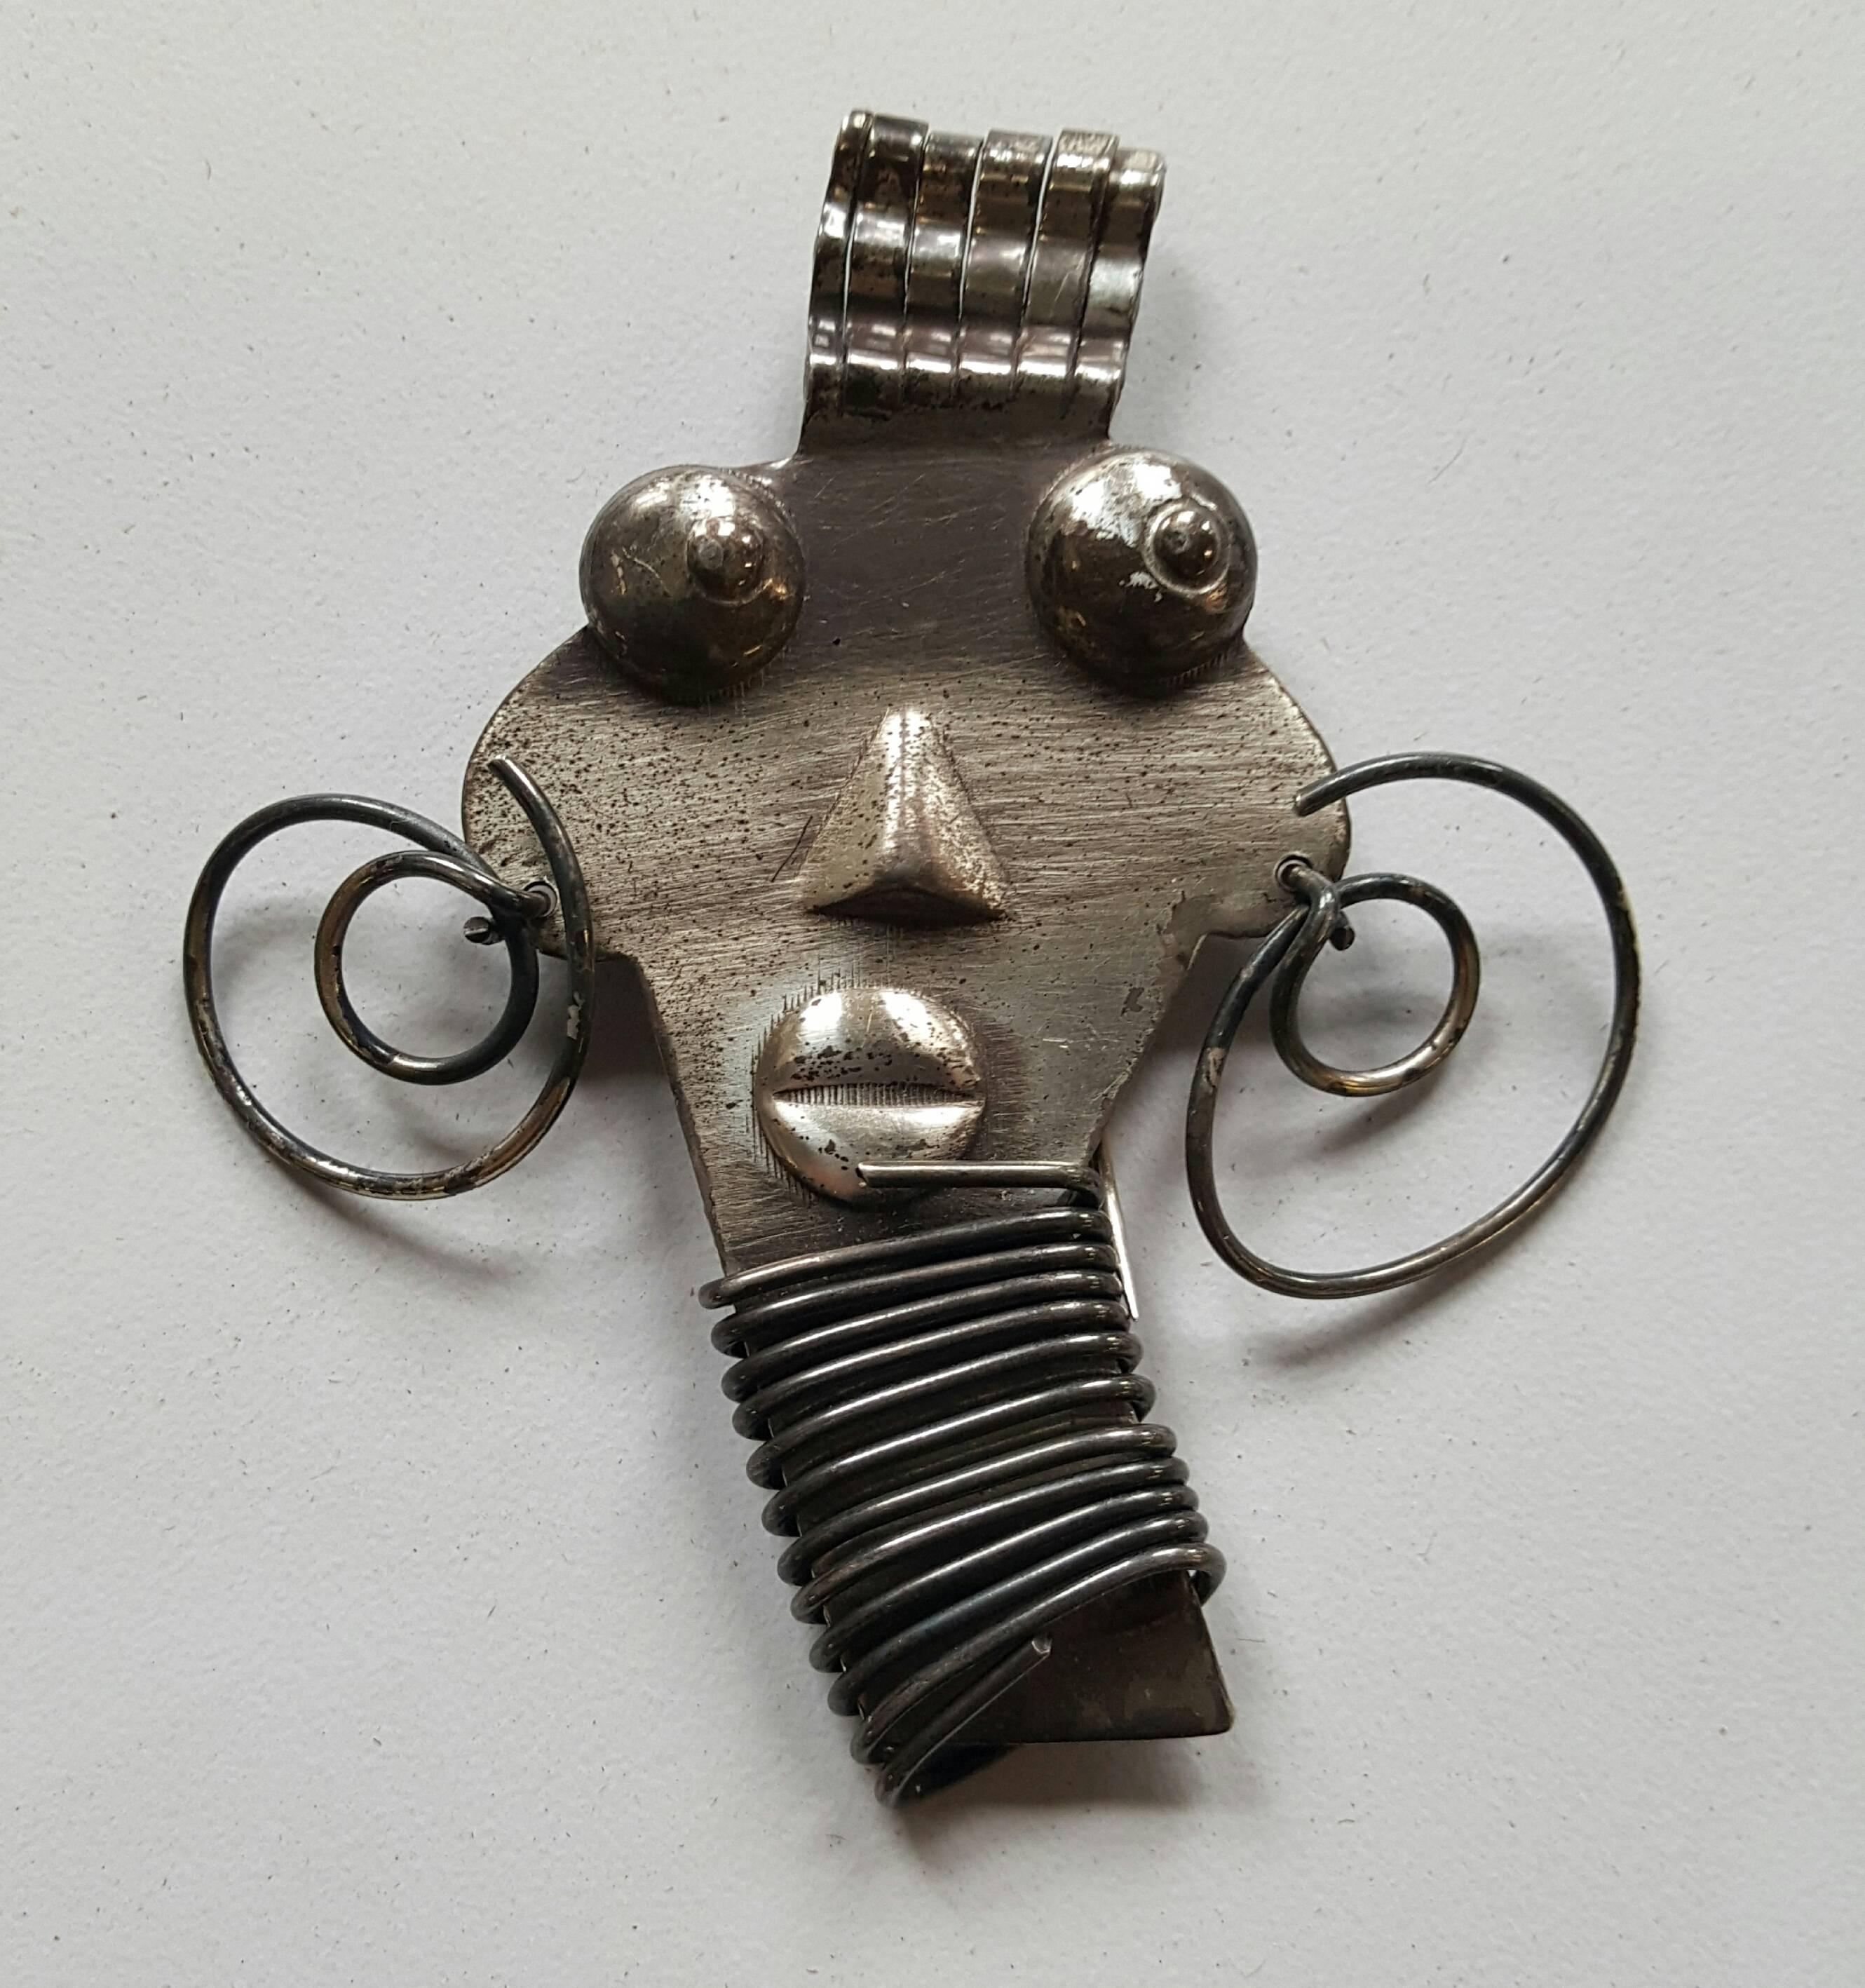 1950s ubangi woman pin is among the most striking of artist Rebajes pieces. Seldom seen sterling silver version, as most Rebajes pieces are in copper. It is jigsaw cut with wrapped wire throat, wire earrings curled hair and characteristic oxidized